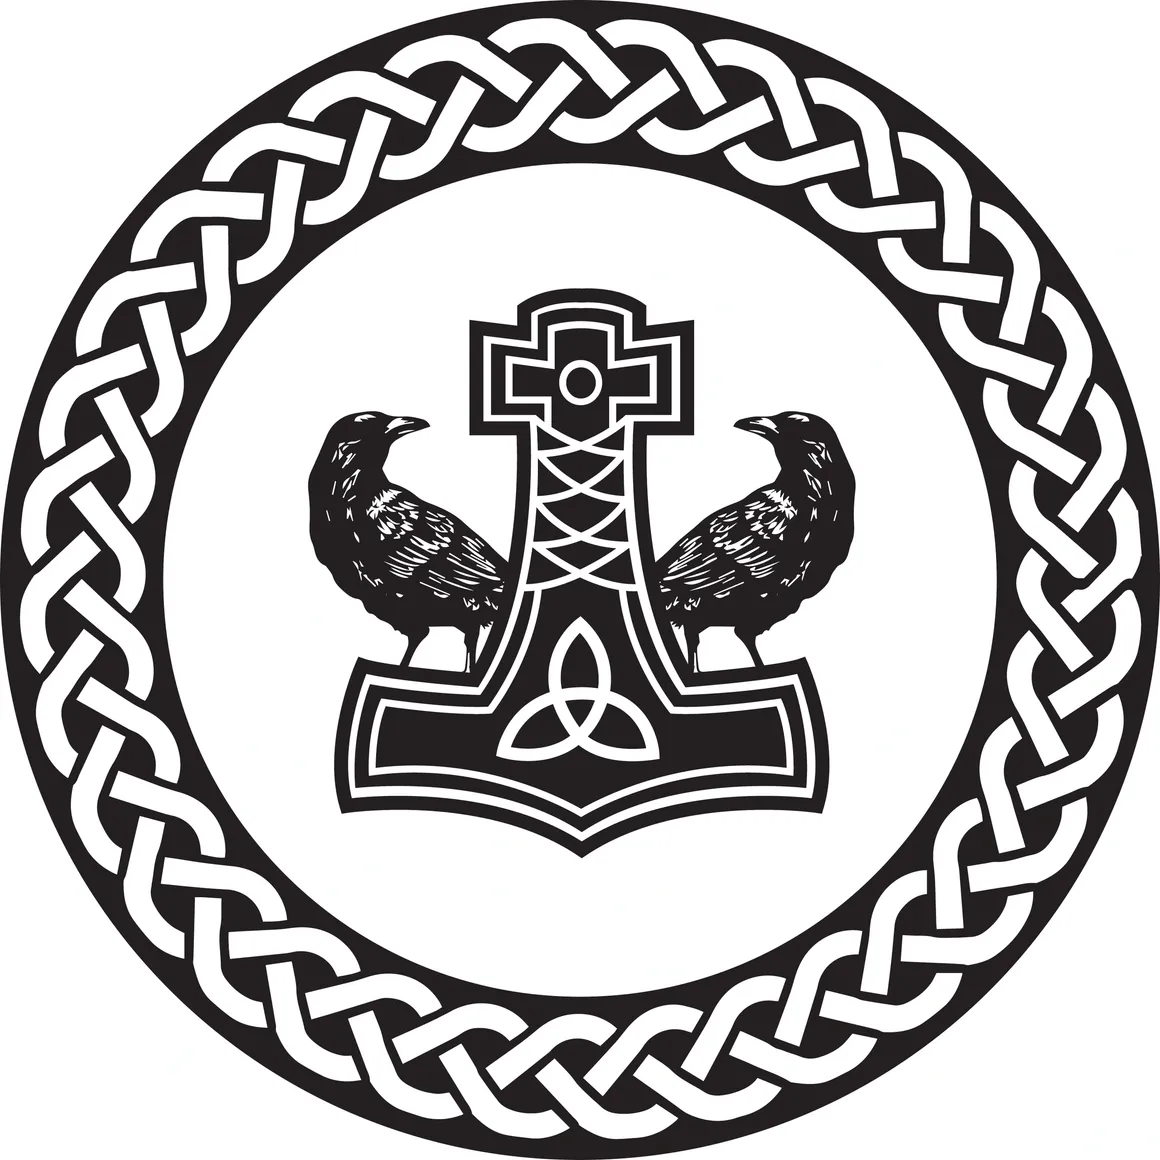 A black and white picture of a cross, celtic knot, and birds.